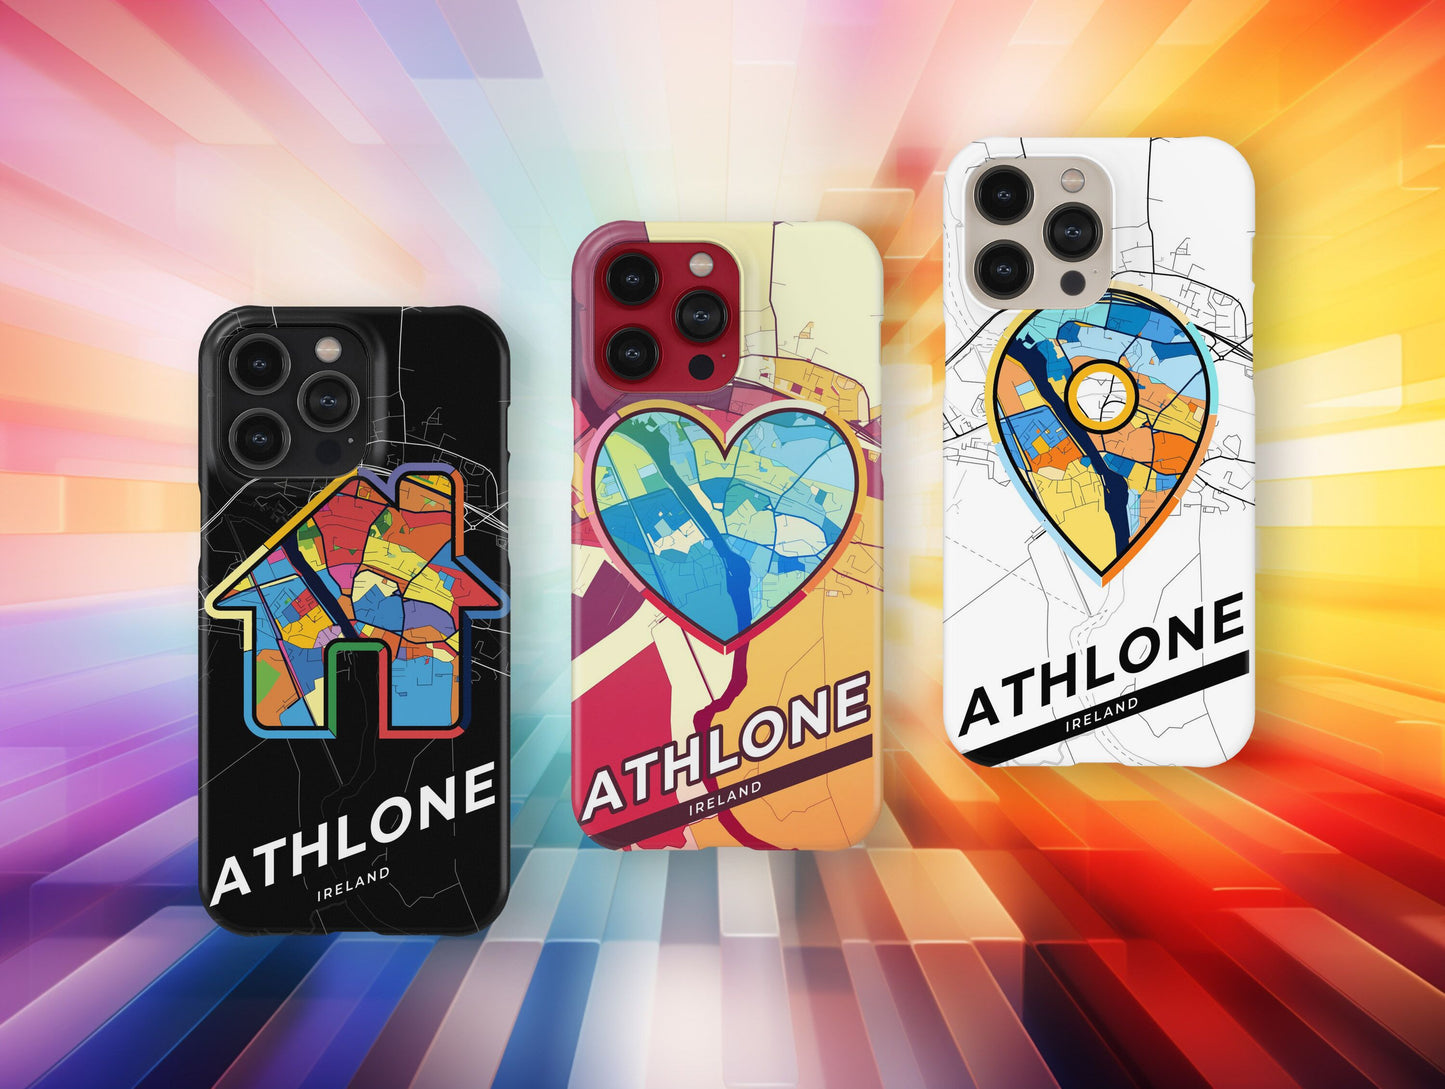 Athlone Ireland slim phone case with colorful icon. Birthday, wedding or housewarming gift. Couple match cases.